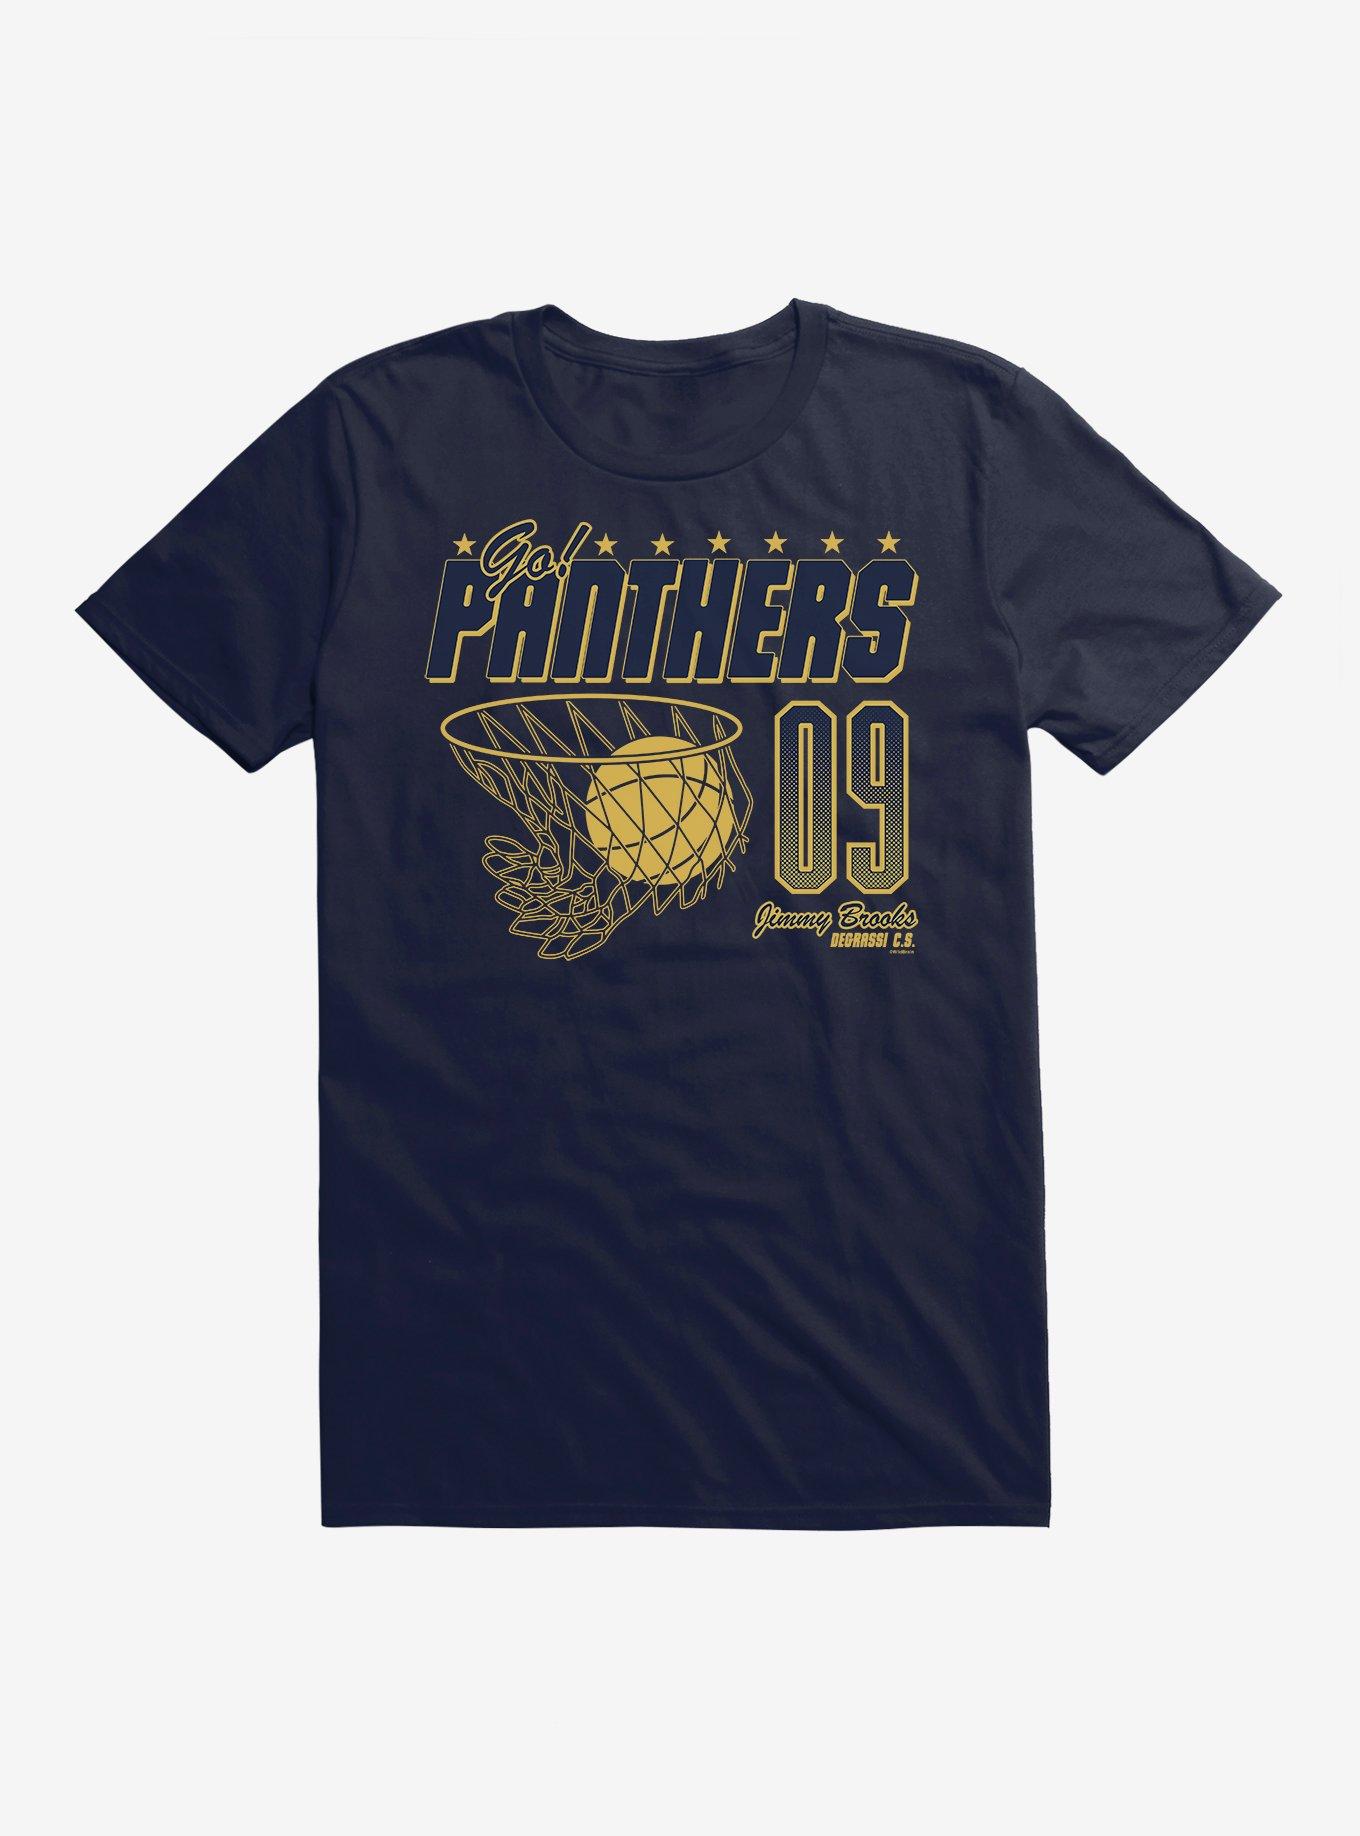 Degrassi: The Next Generation Go Panthers 09 Jimmy Brooks T-Shirt